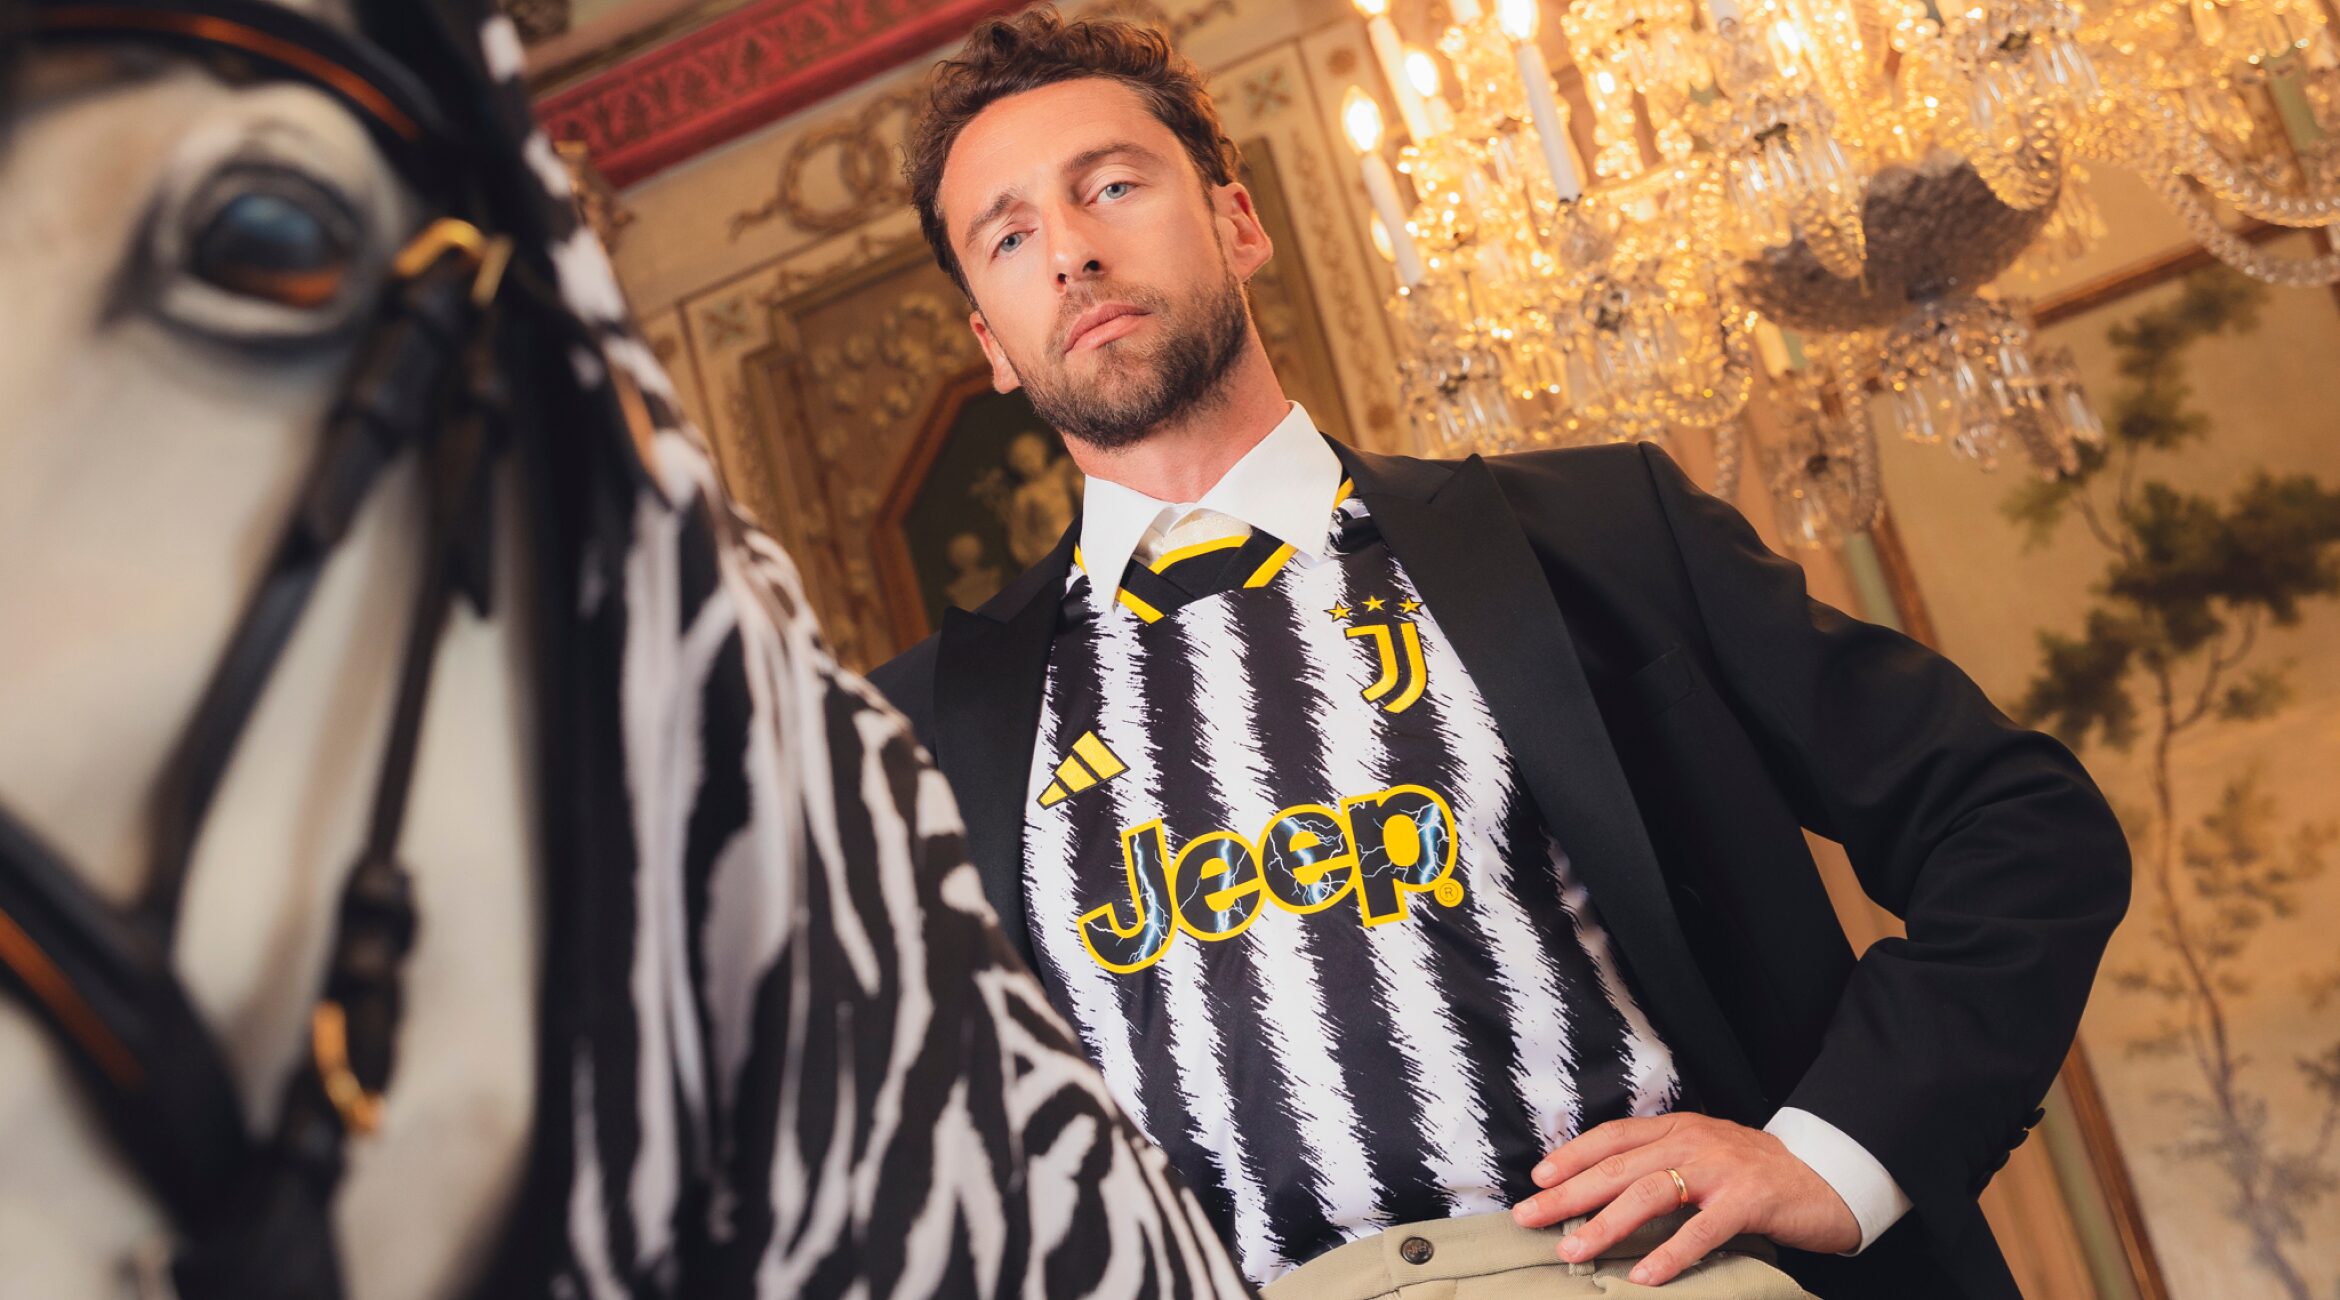 A man in Juventus uniform posing for the camera